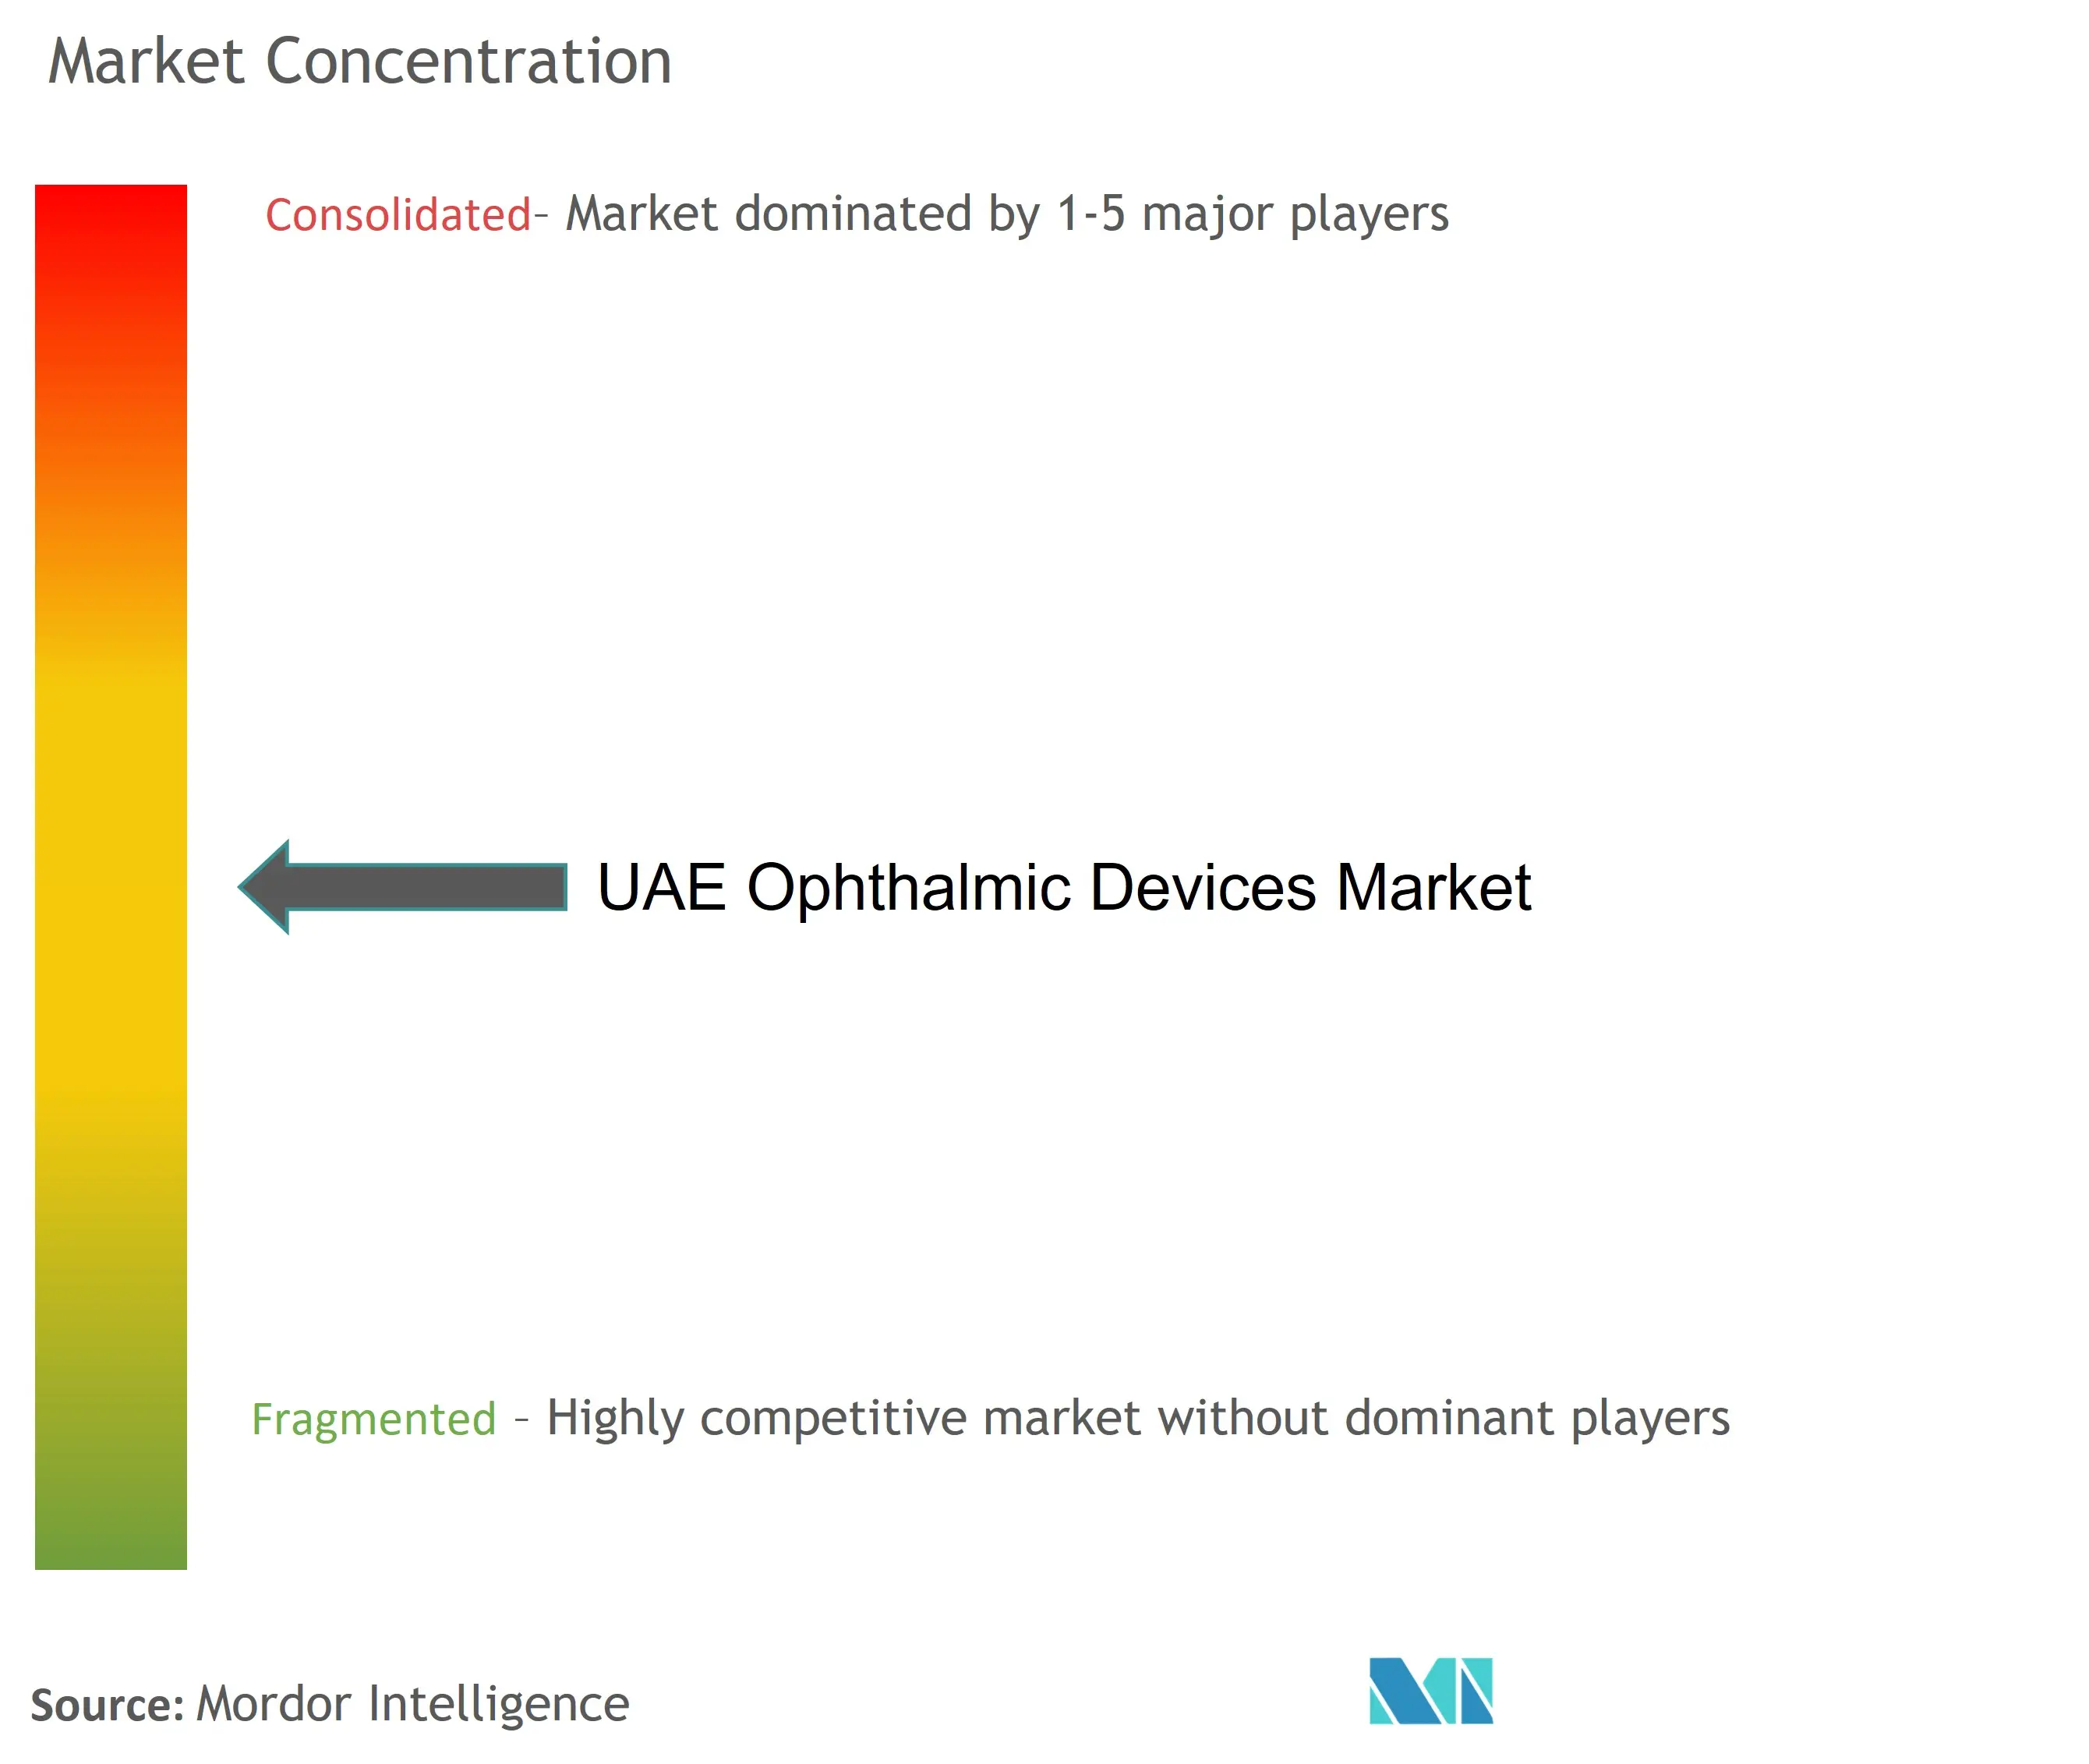 Uae Ophthalmic Devices Market Concentration